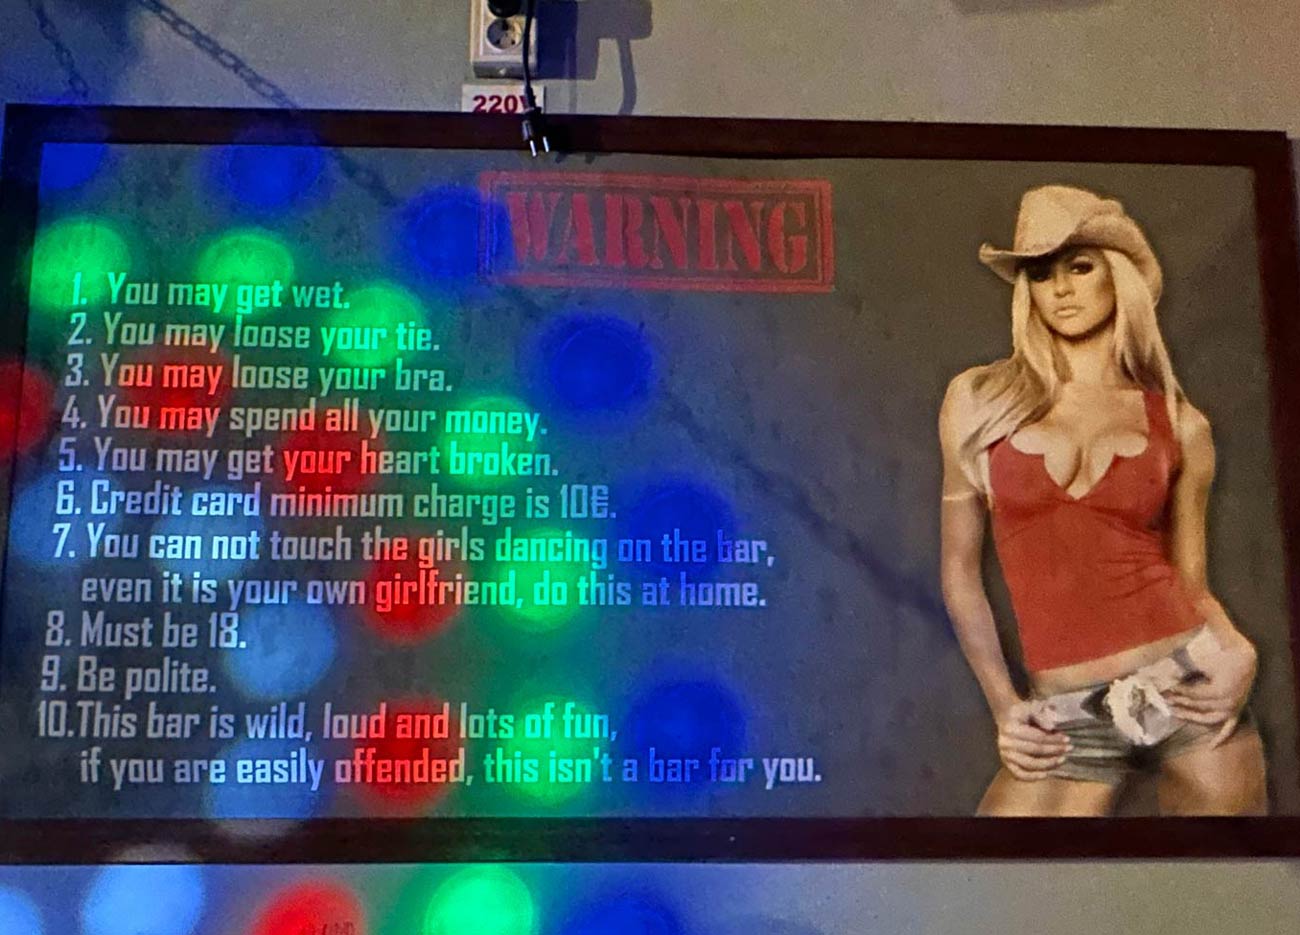 This warning list in the bar.